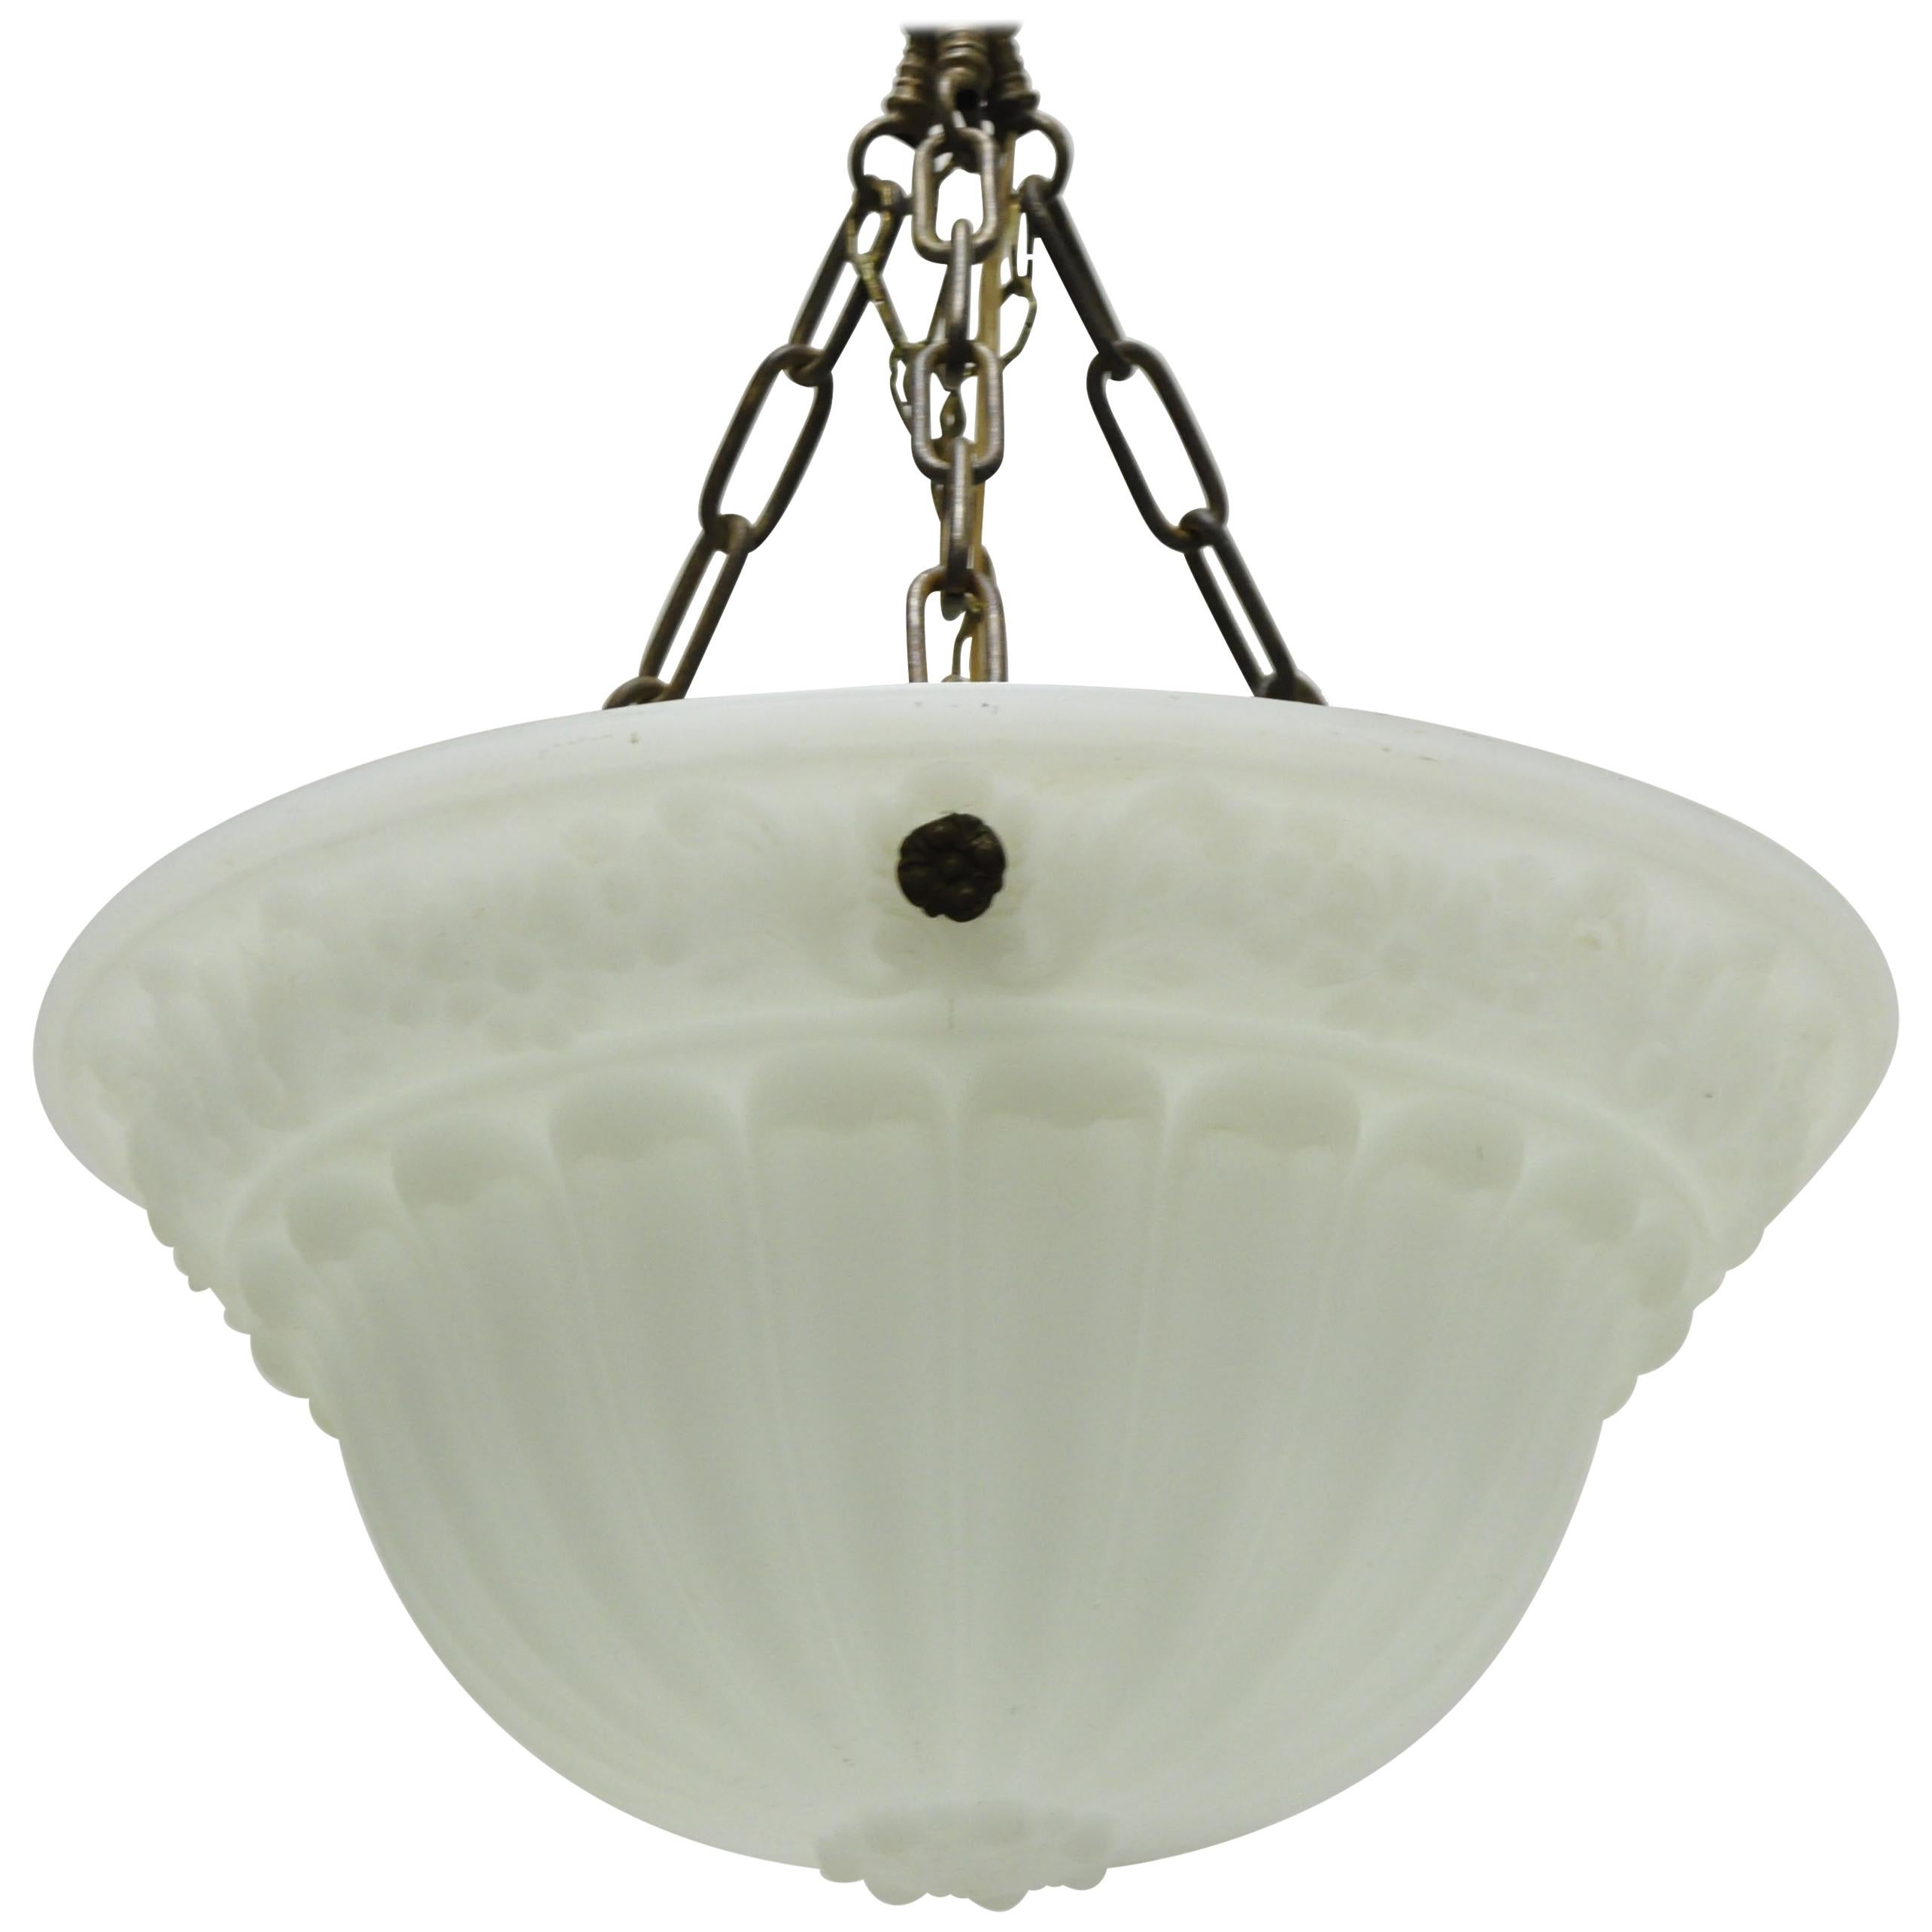 Antique White Frosted Glass Victorian Dome Hanging Chandelier Light Fixture